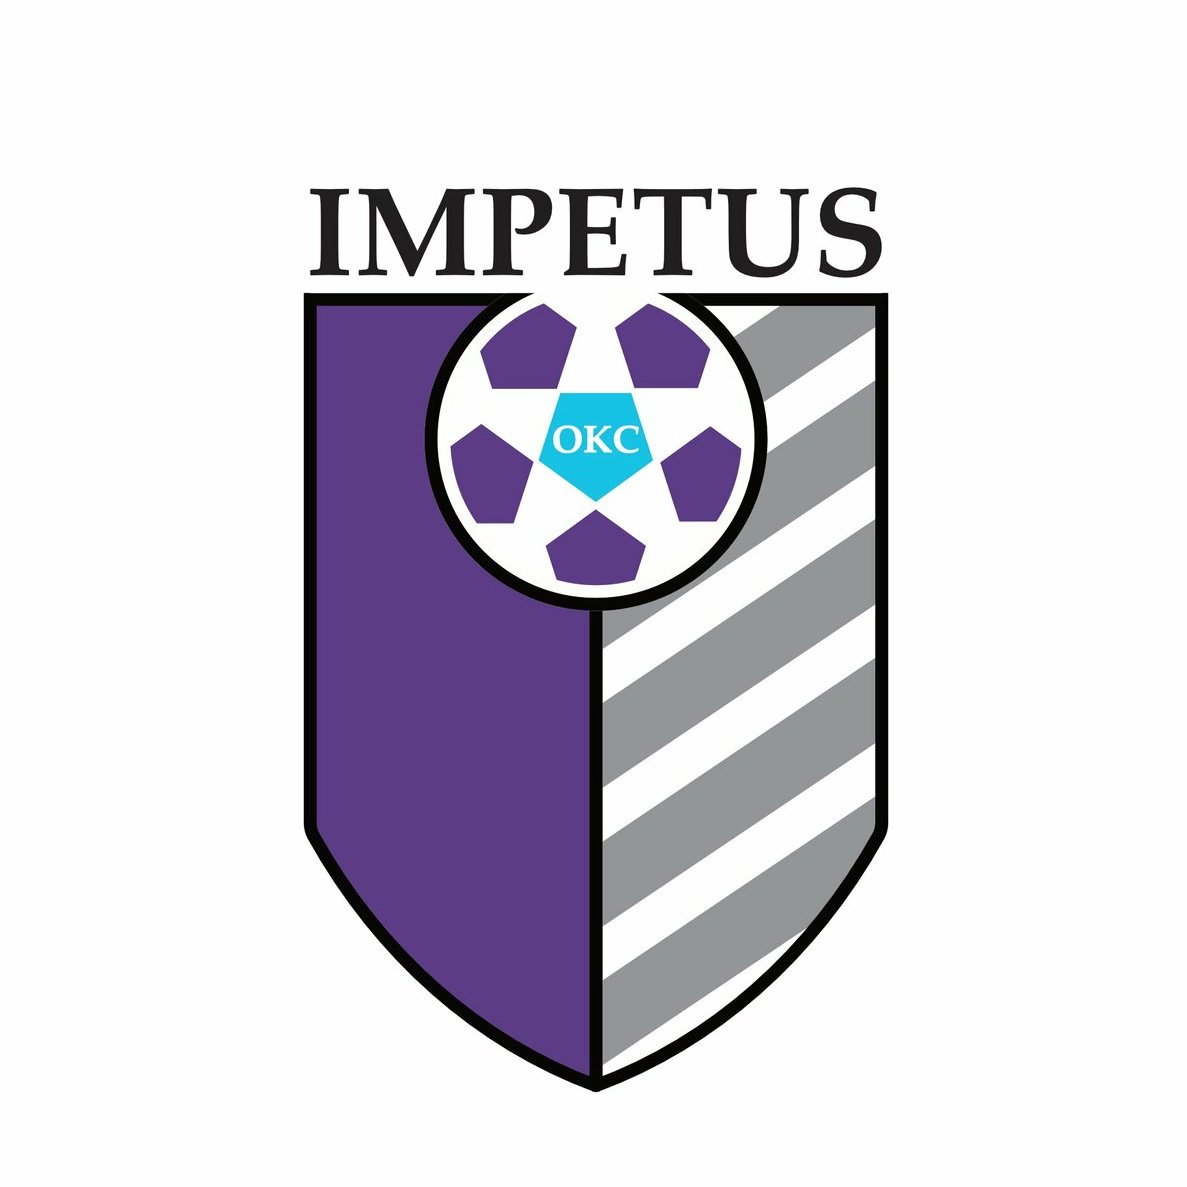 We are so excited to share our new logo as we prepare to support our team the @OKC1889!! #uptheImps # OKCimpetus #soccer #supportergroup #NewProfilePic